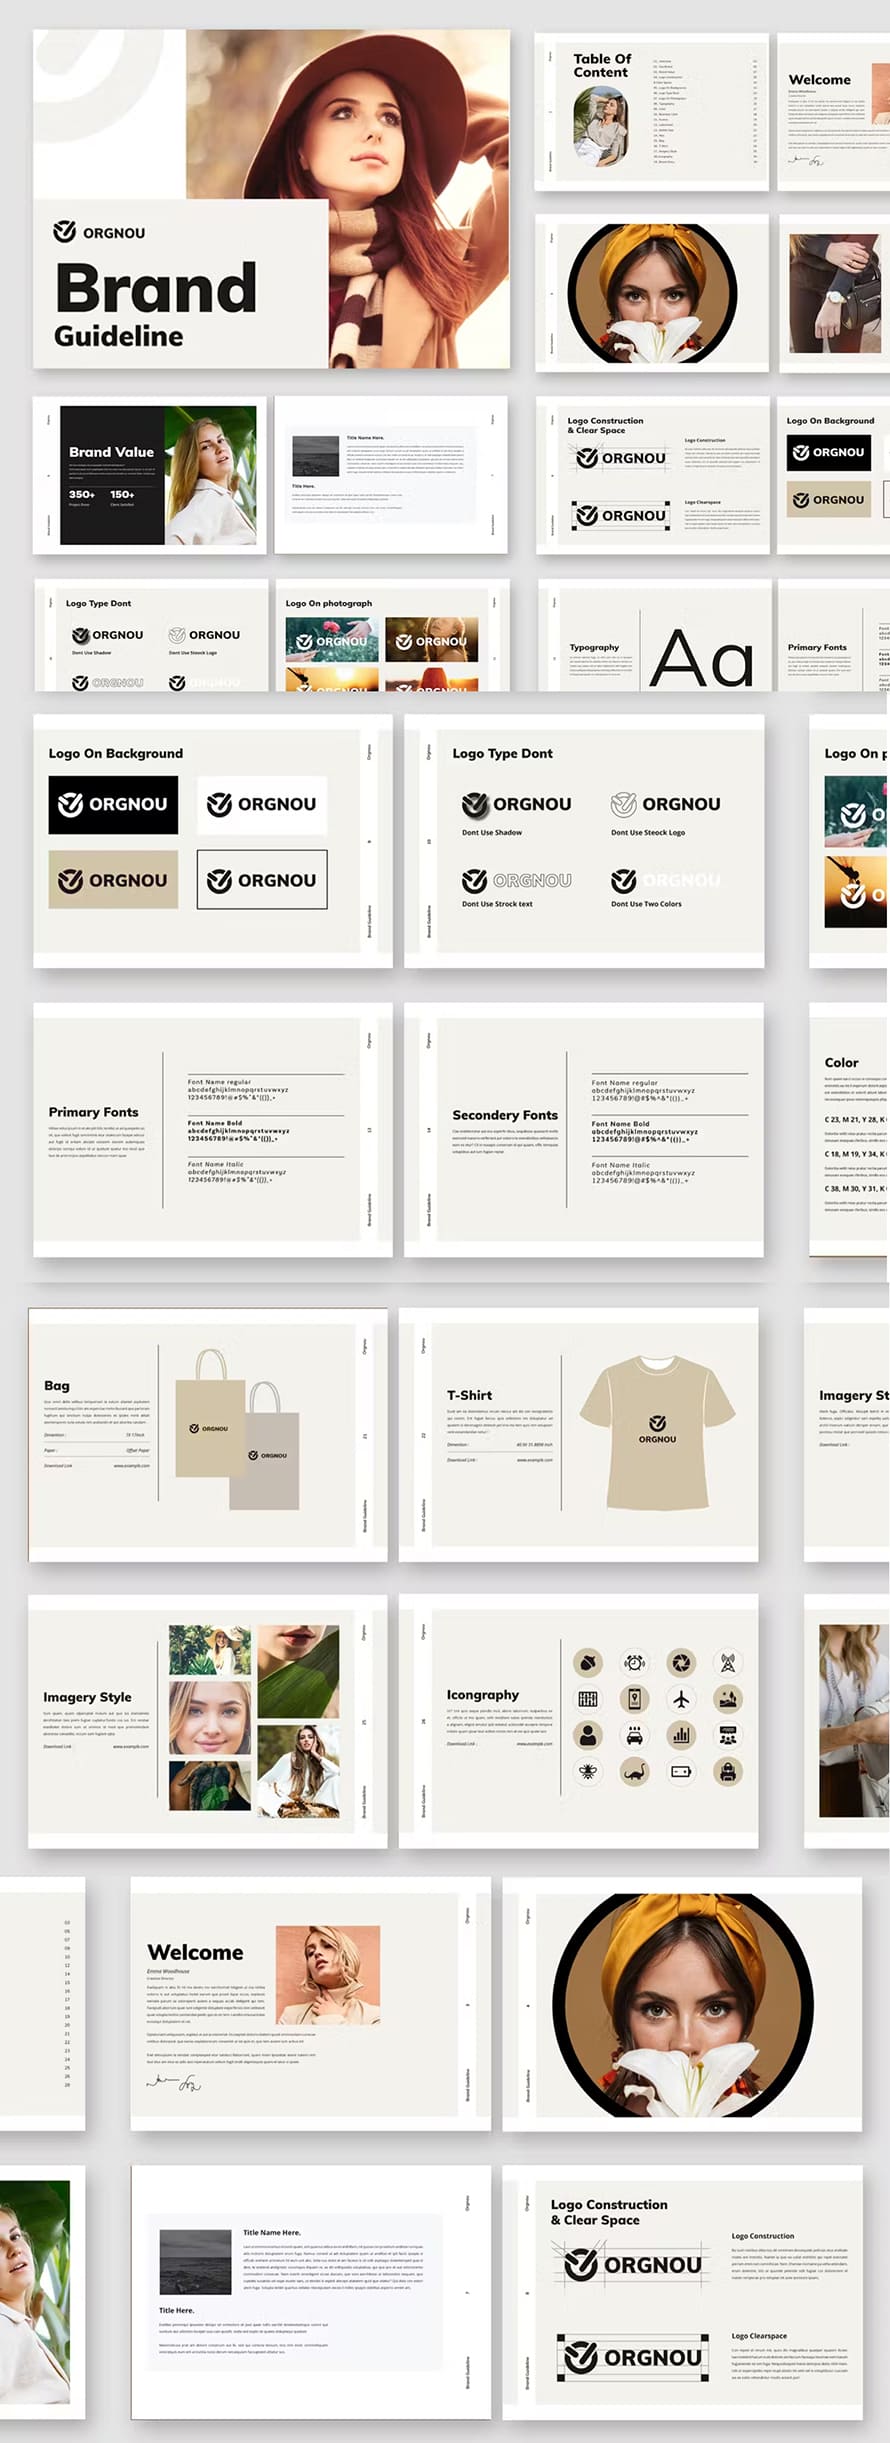 Attractive Brand Identity Guidelines Templates